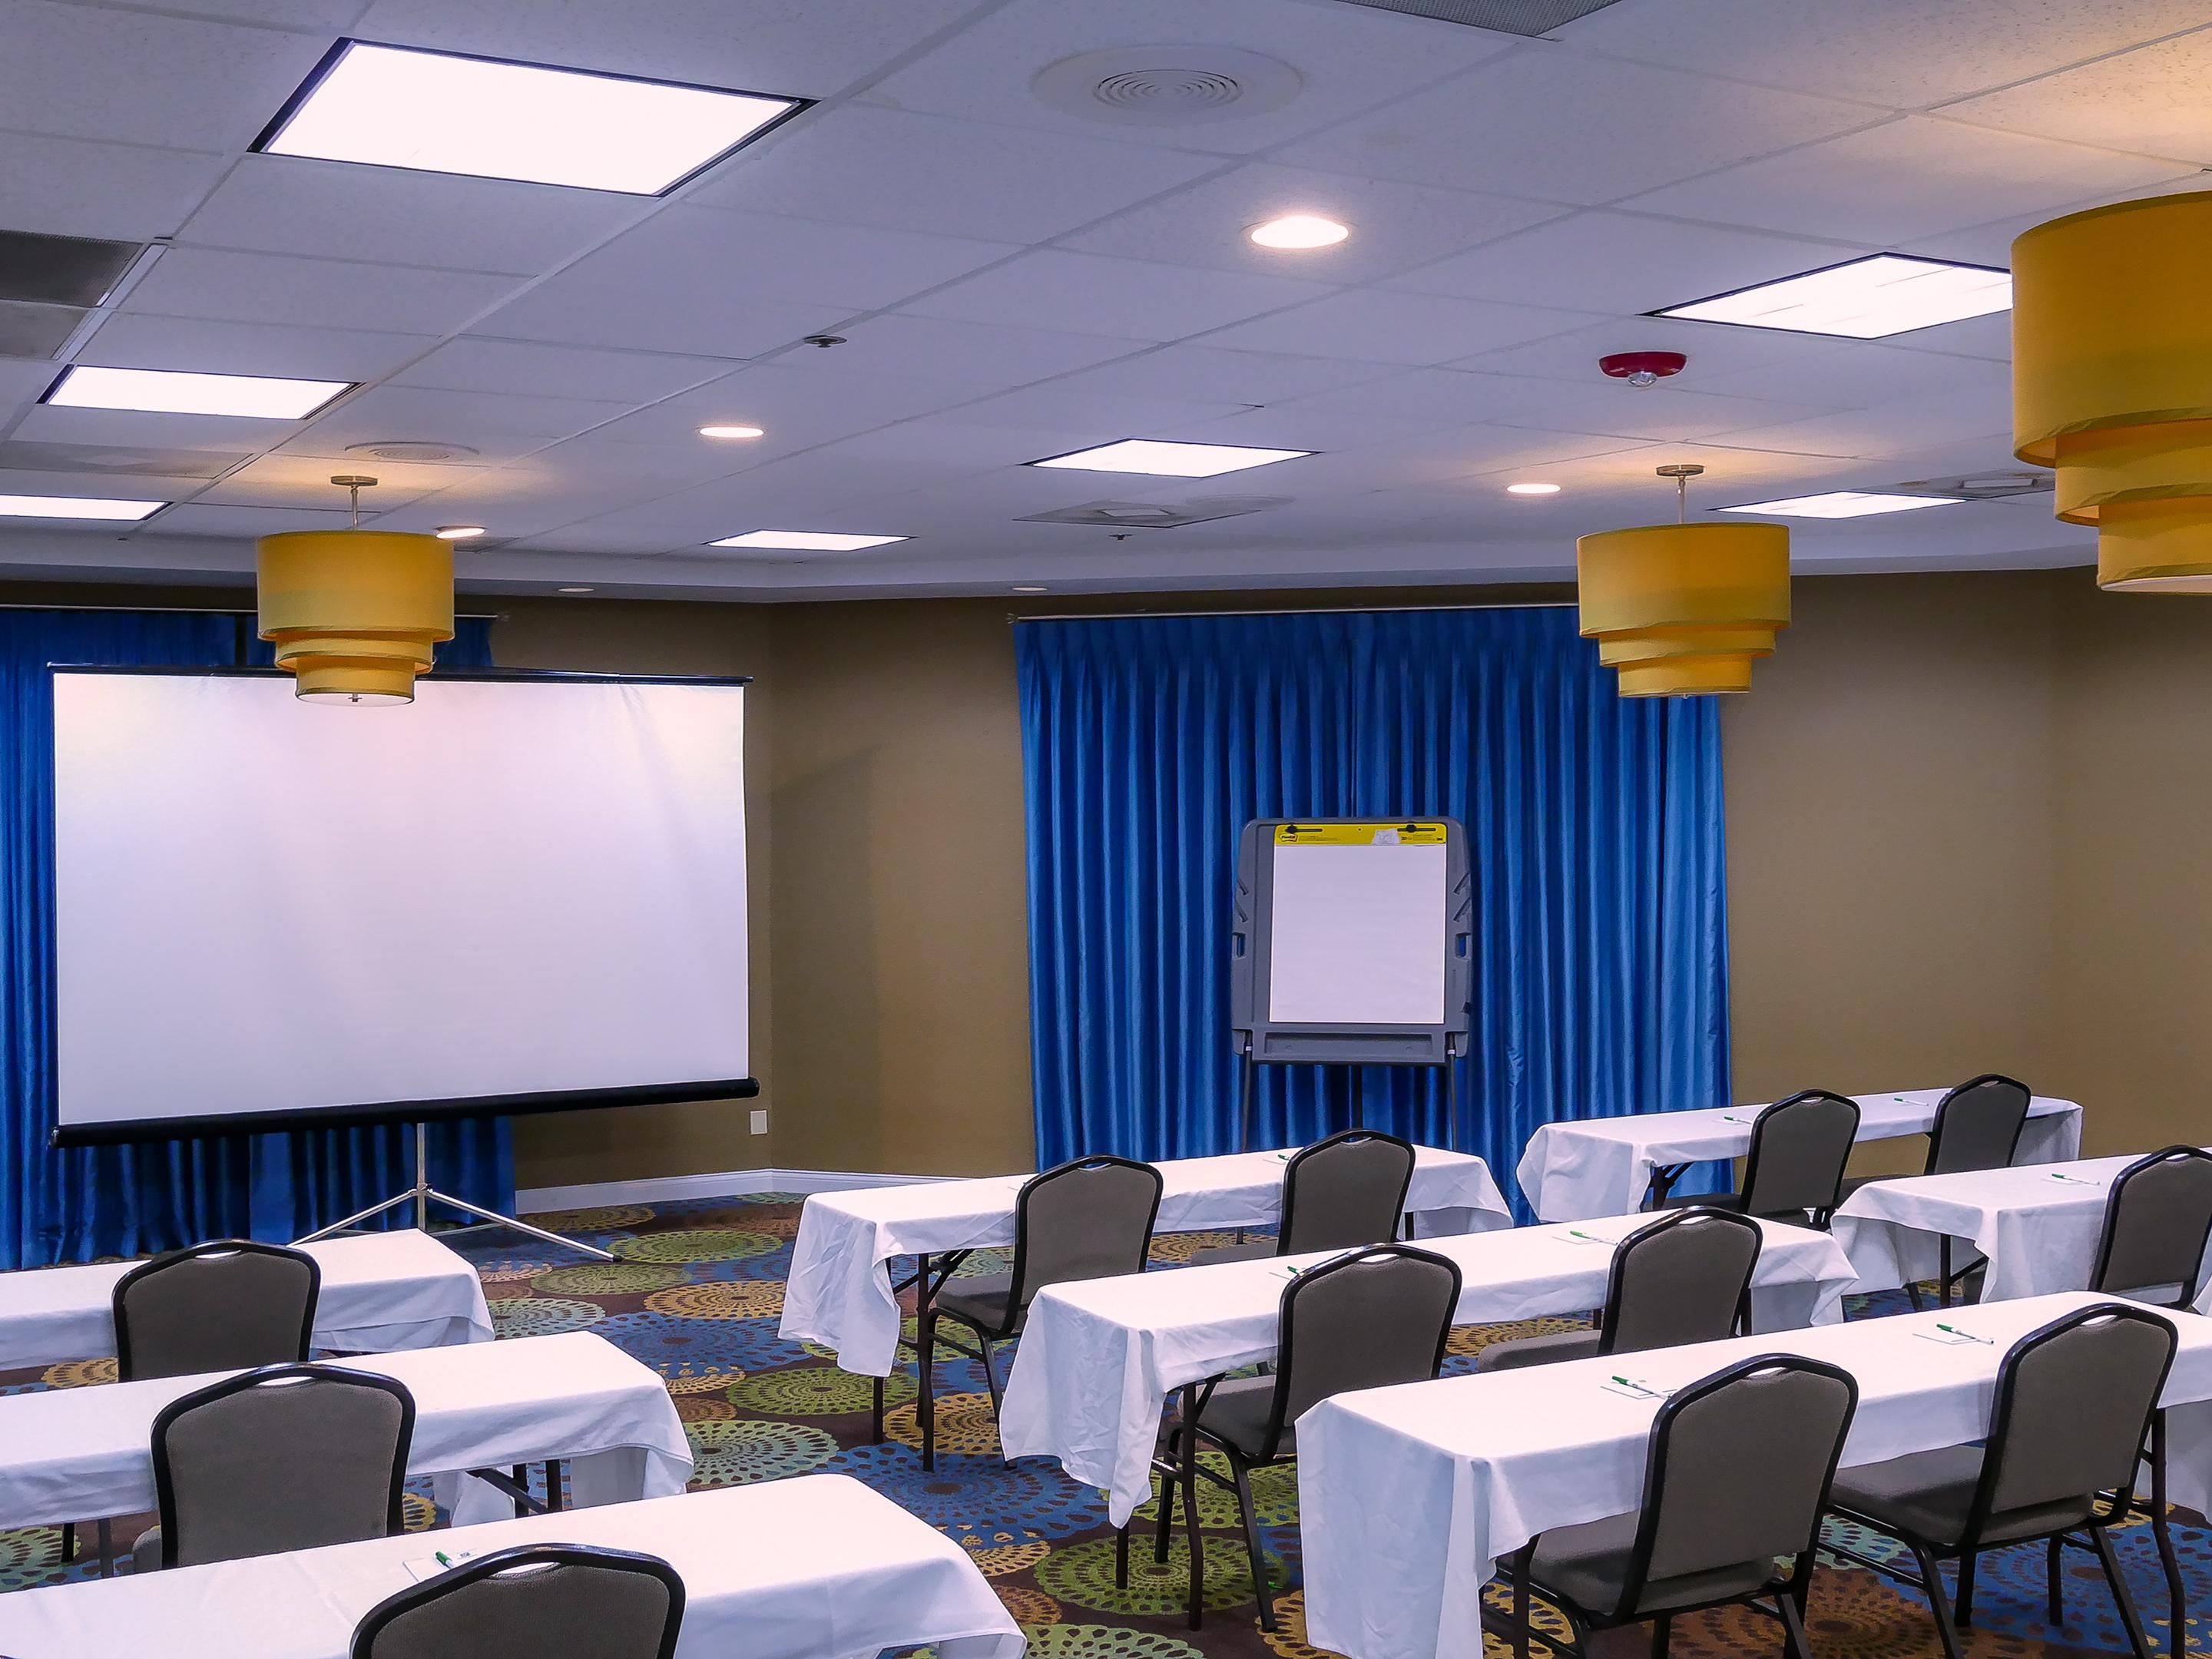 We are delighted to offer a wide variety of options for your next meeting or event. Our Ford Room has 768 square feet and Edison Room has 1435 square feet, both overlook our tropical pool and are ideal for seminars, workshops, small conferences, and family functions.